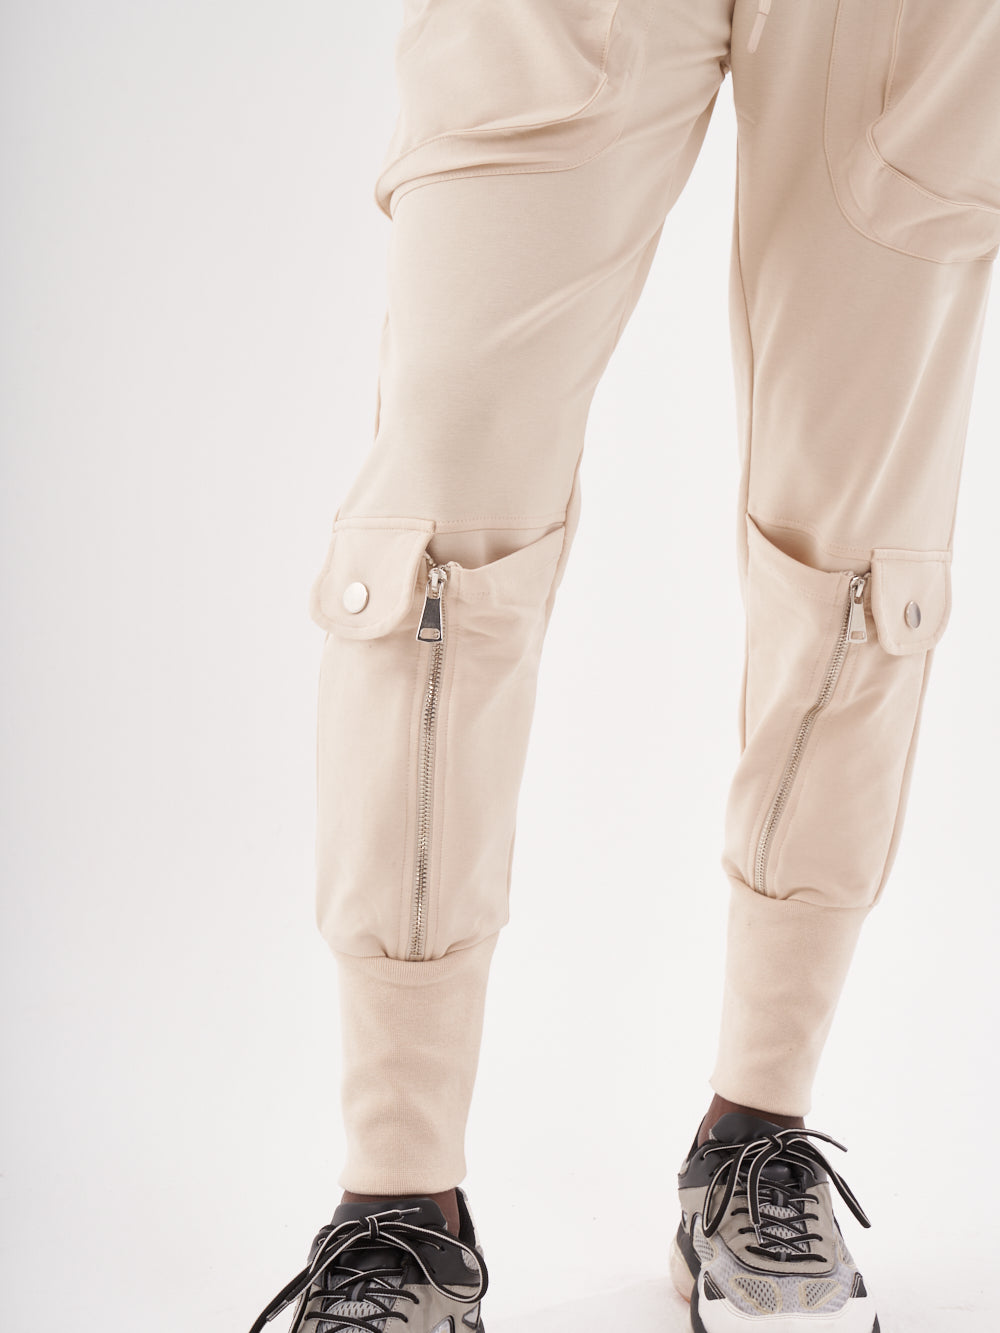 A man wearing a pair of stylish GUERRILLA | BEIGE jogging pants and comfortable sneakers.